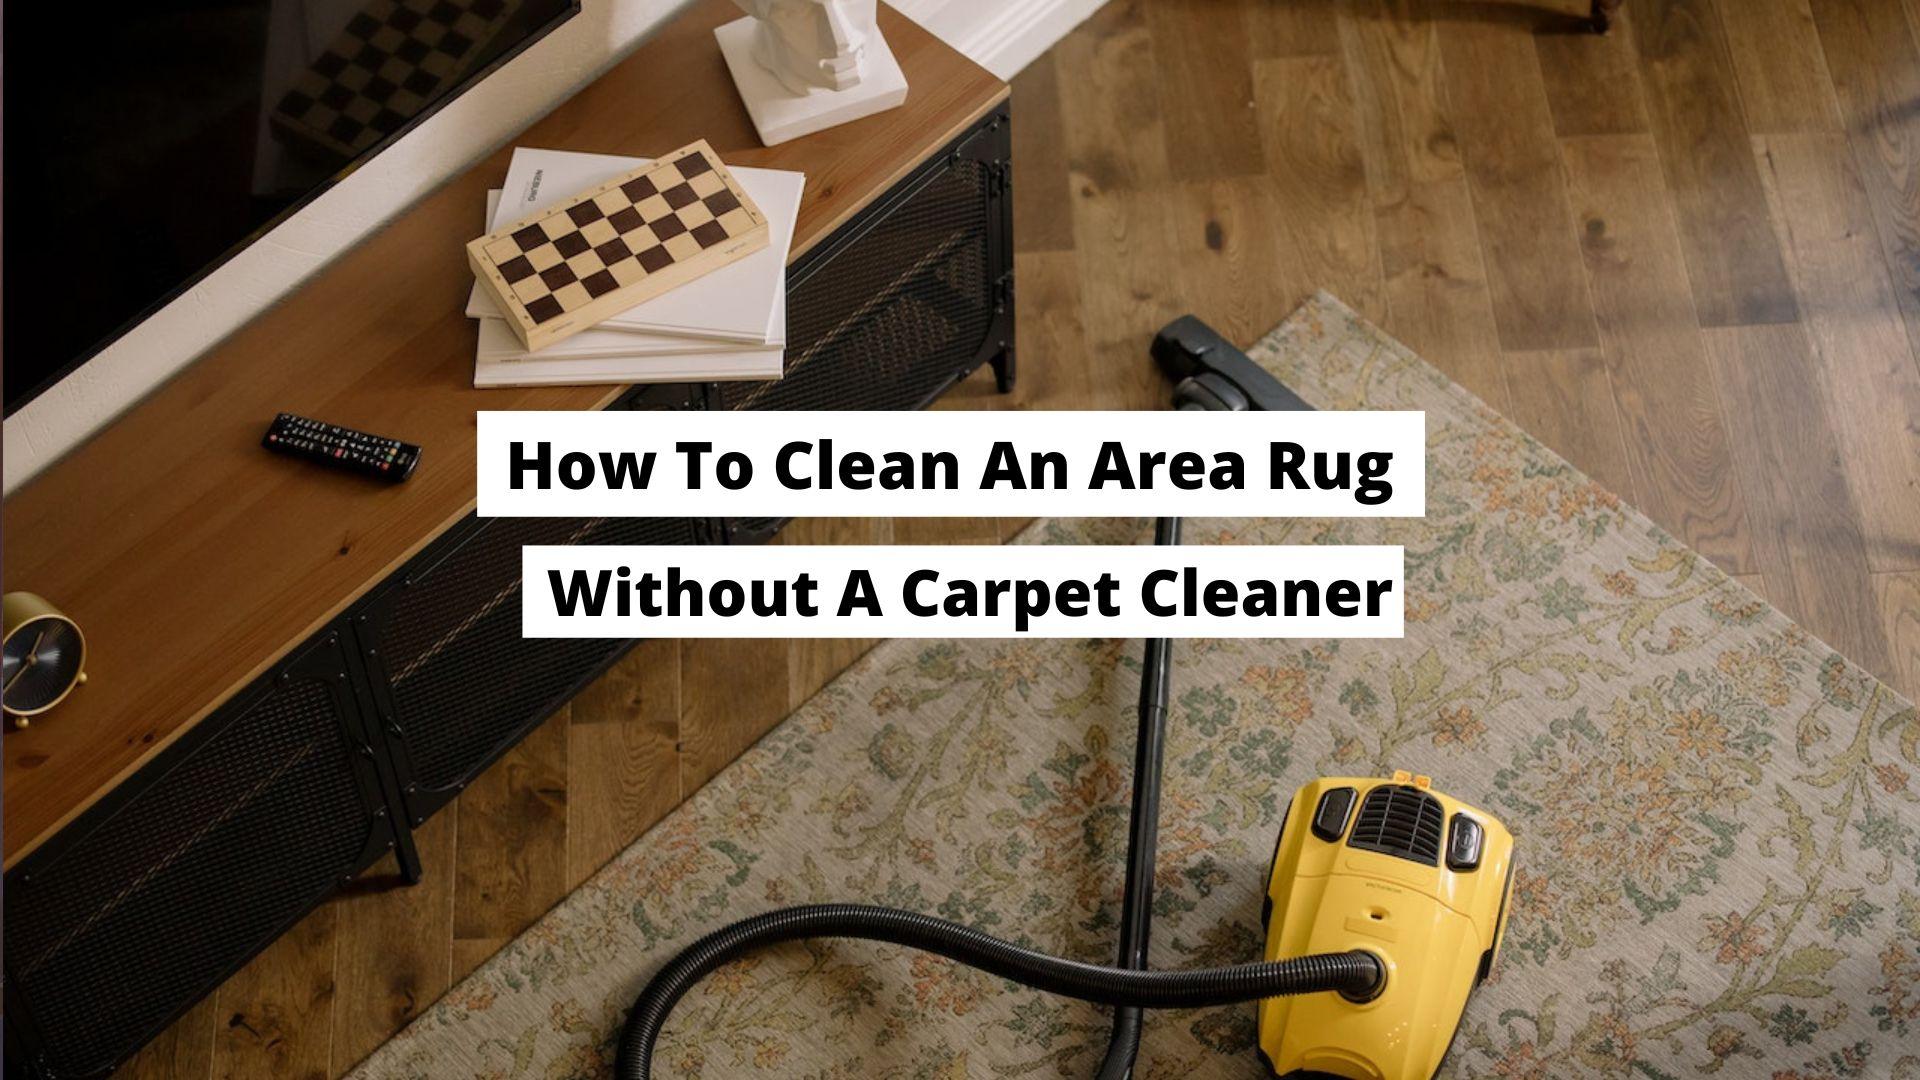 How To Clean An Area Rug Without A Carpet Cleaner